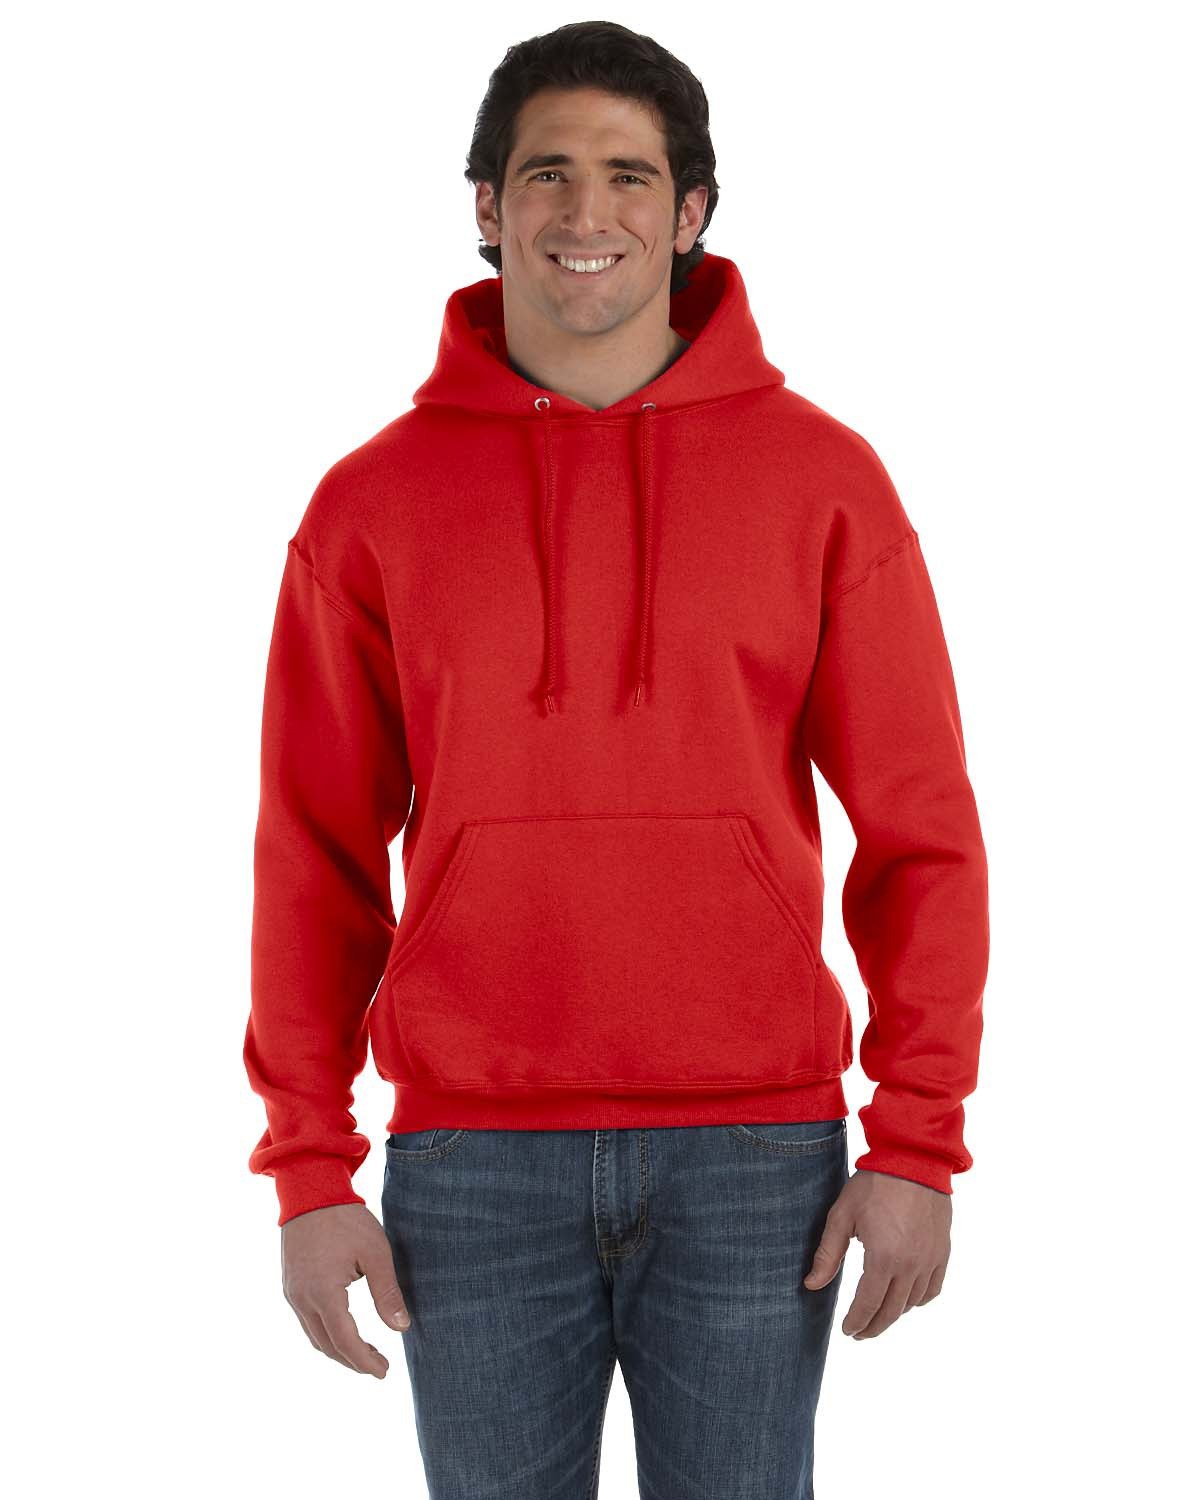 Fruit of the Loom Adult Supercotton™ Pullover Hooded Sweatshirt TRUE RED 